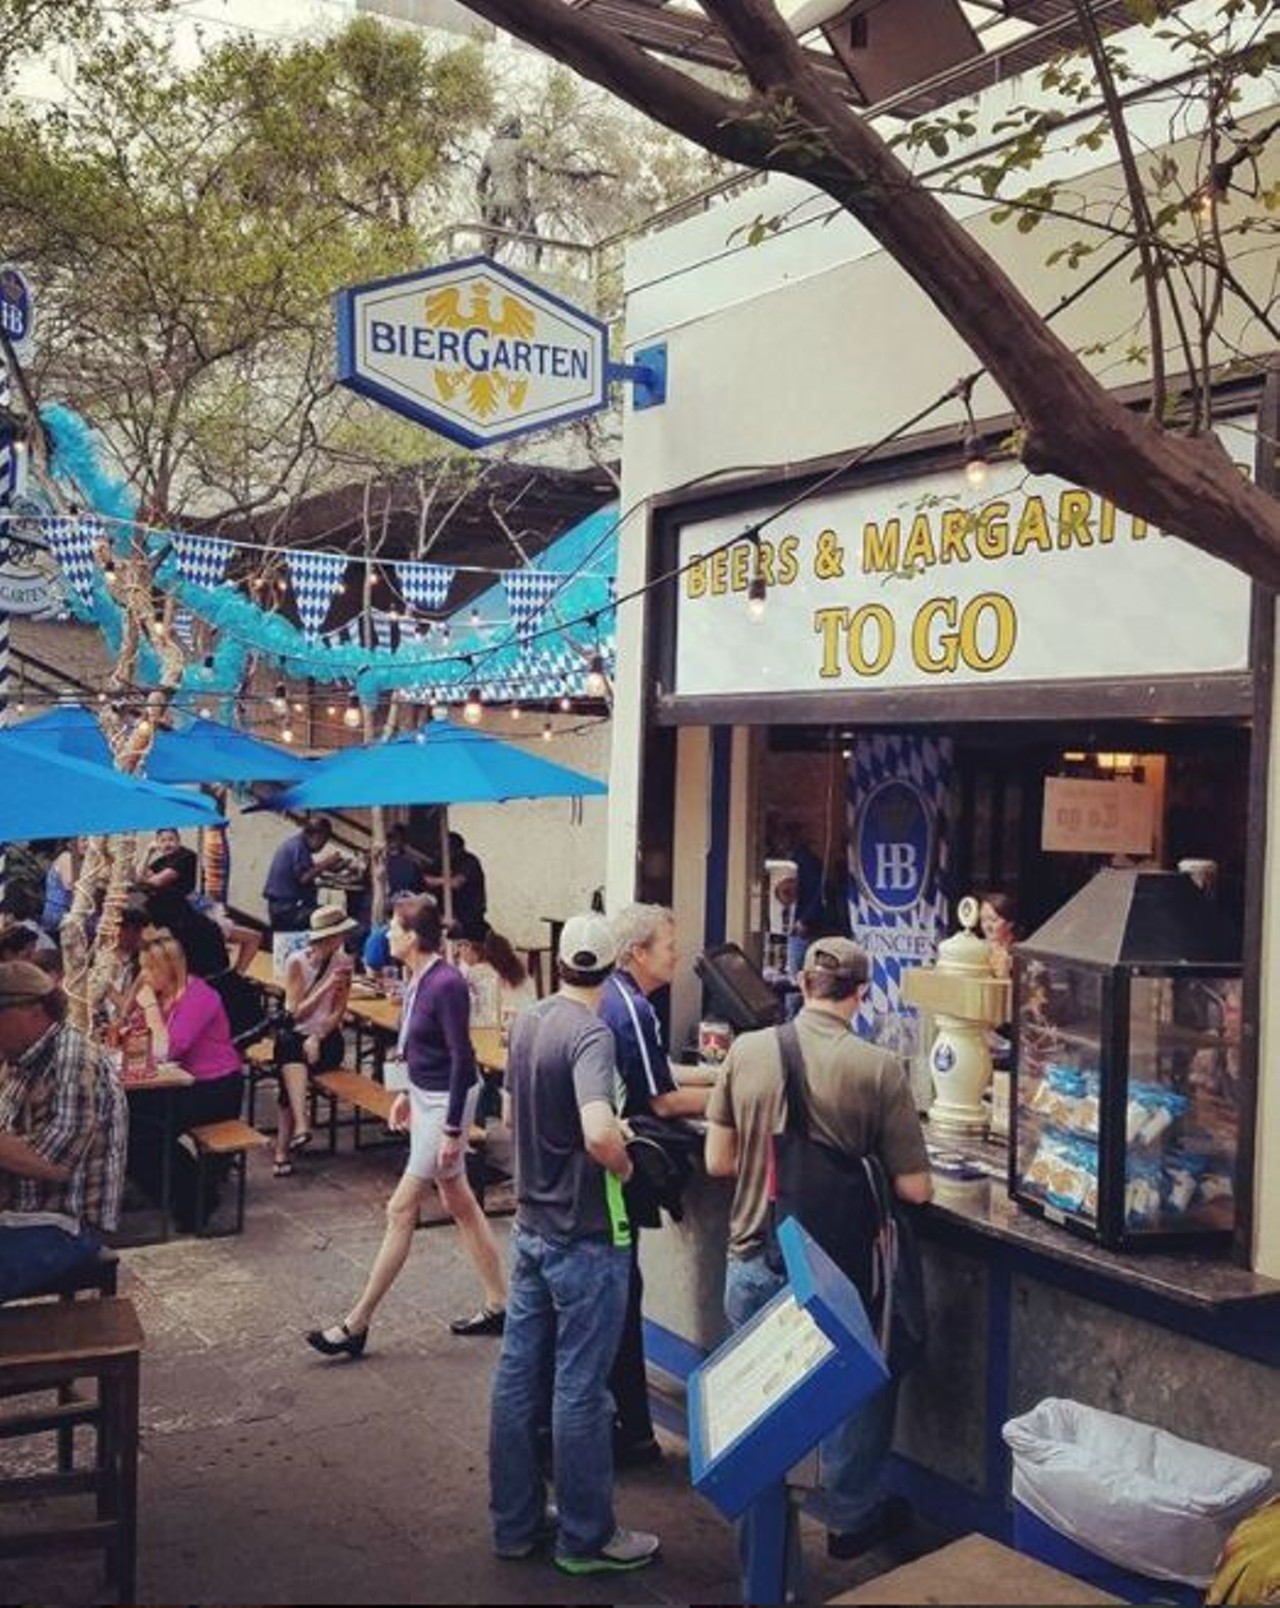 Bier Garten Riverwalk
126 Losoya St., (210) 212-7299
Sure, it's location may attract tourists to partake in Riverwalk drinking and shenanigans, but we still love this place's outdoor vibes. 
Photo via Instagram,  sincitydreaming